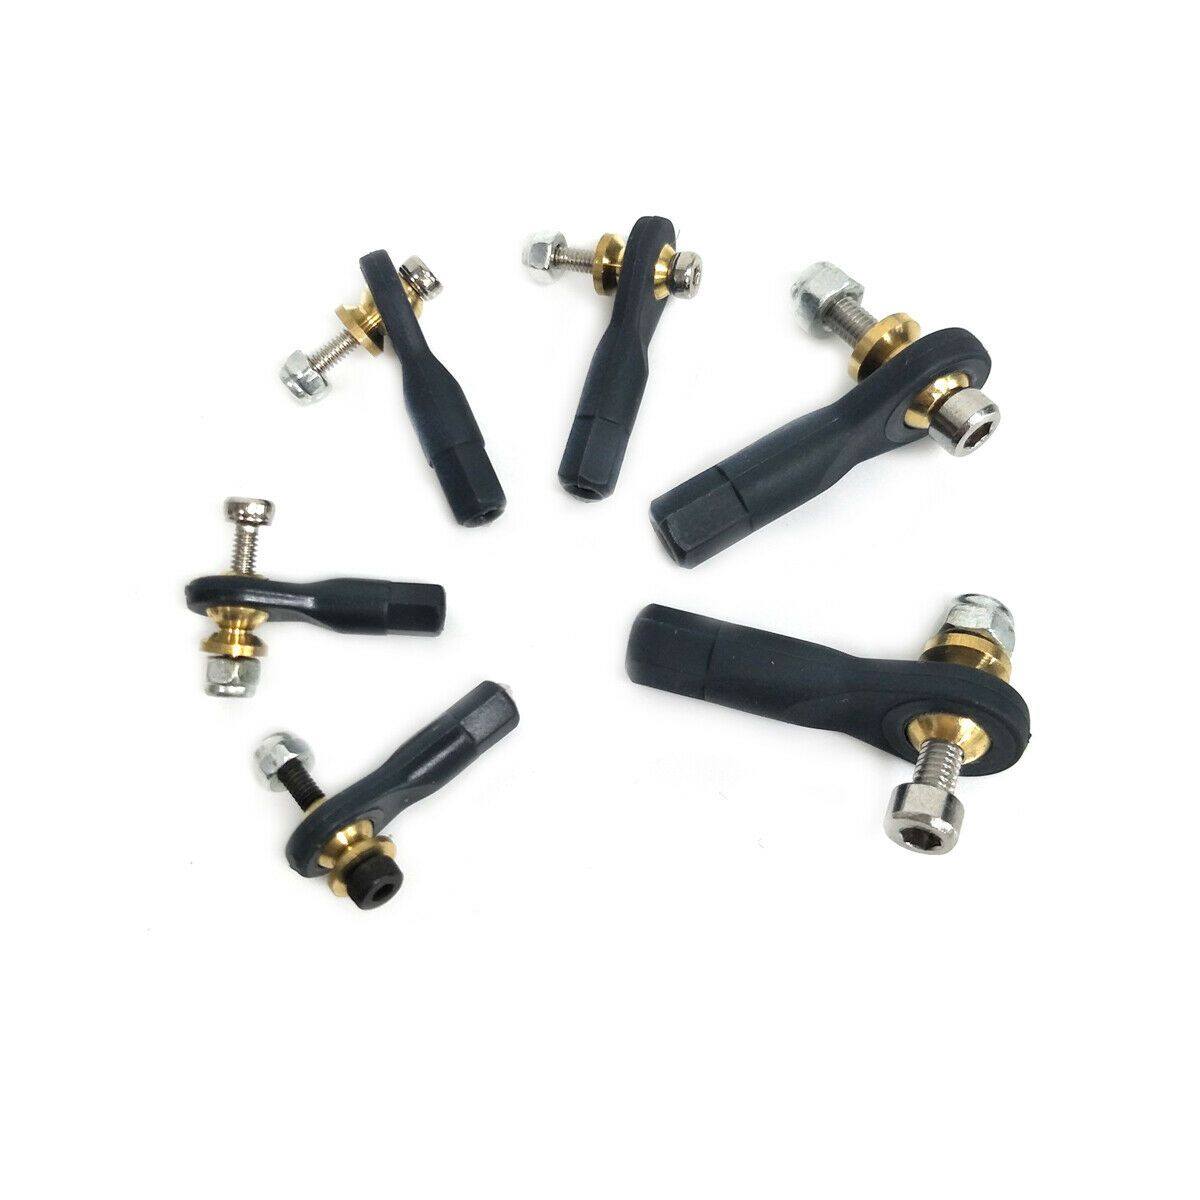 10pcs M2 M2.5 M3 RC Single / Dual Ball Joint Link Rod End With